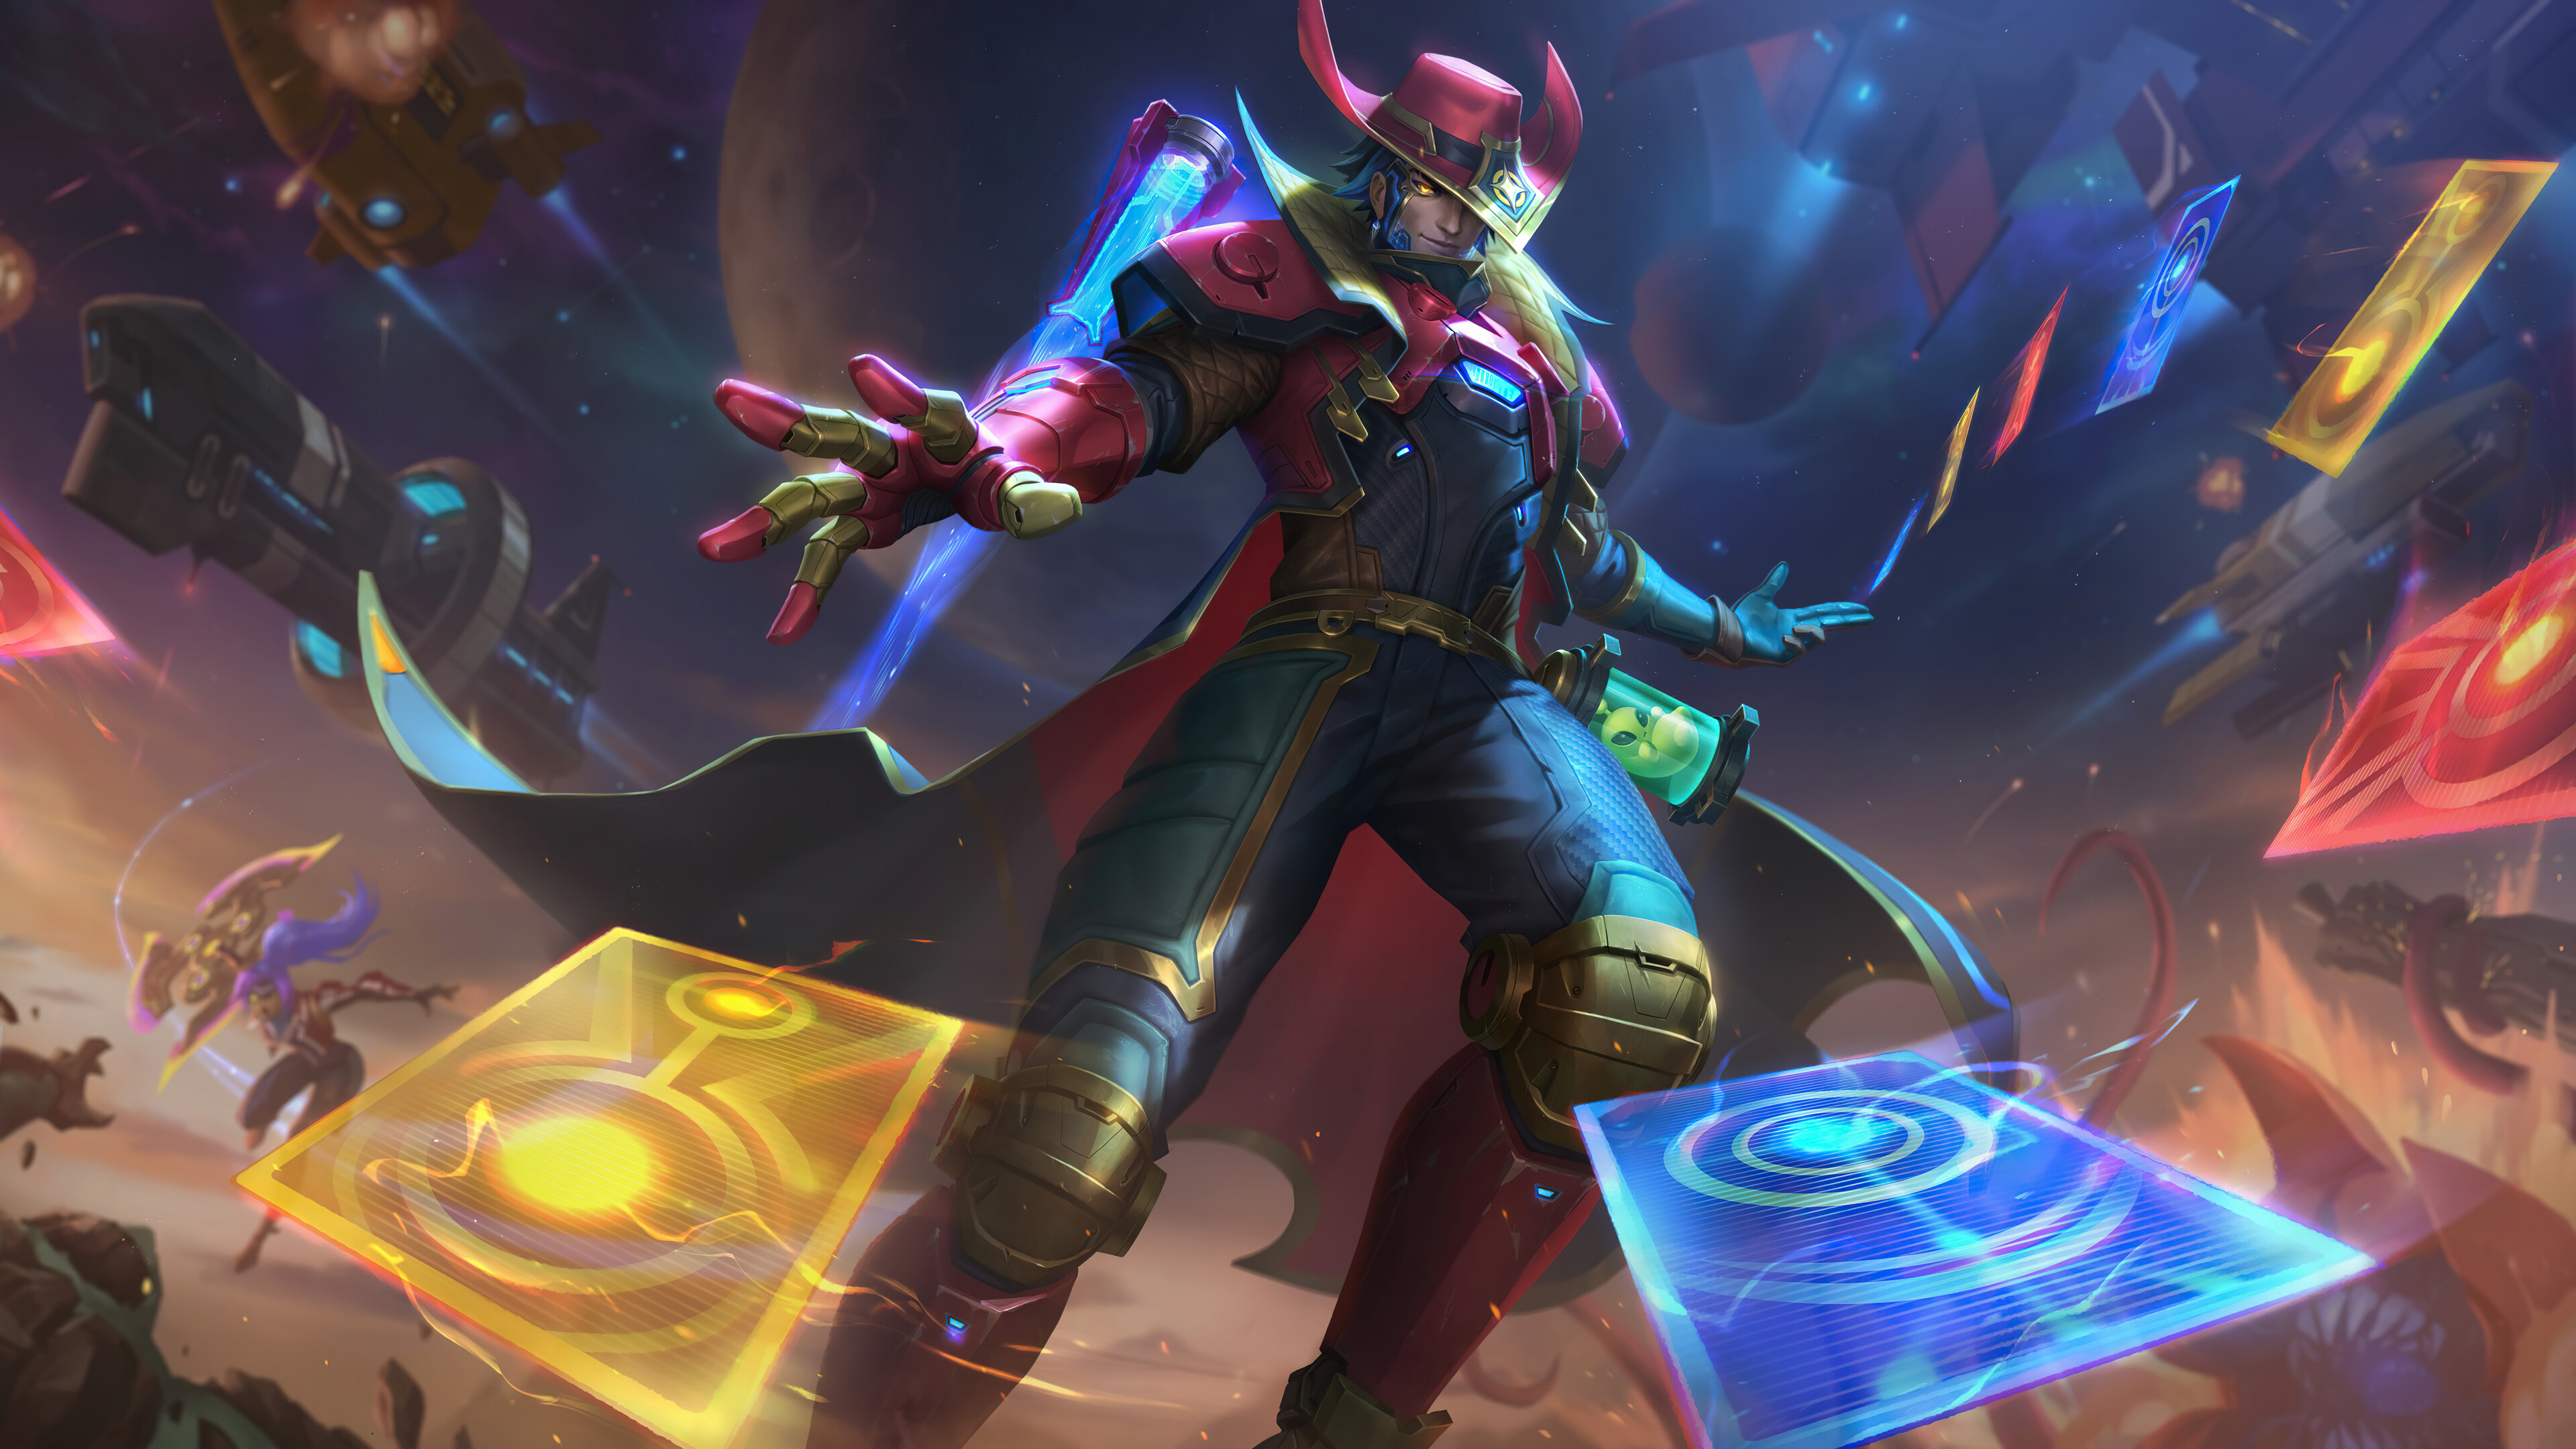 General 3840x2160 The Odyssey League of Legends Riot Games space galaxy GZG Twisted Fate (League of Legends) video games video game characters